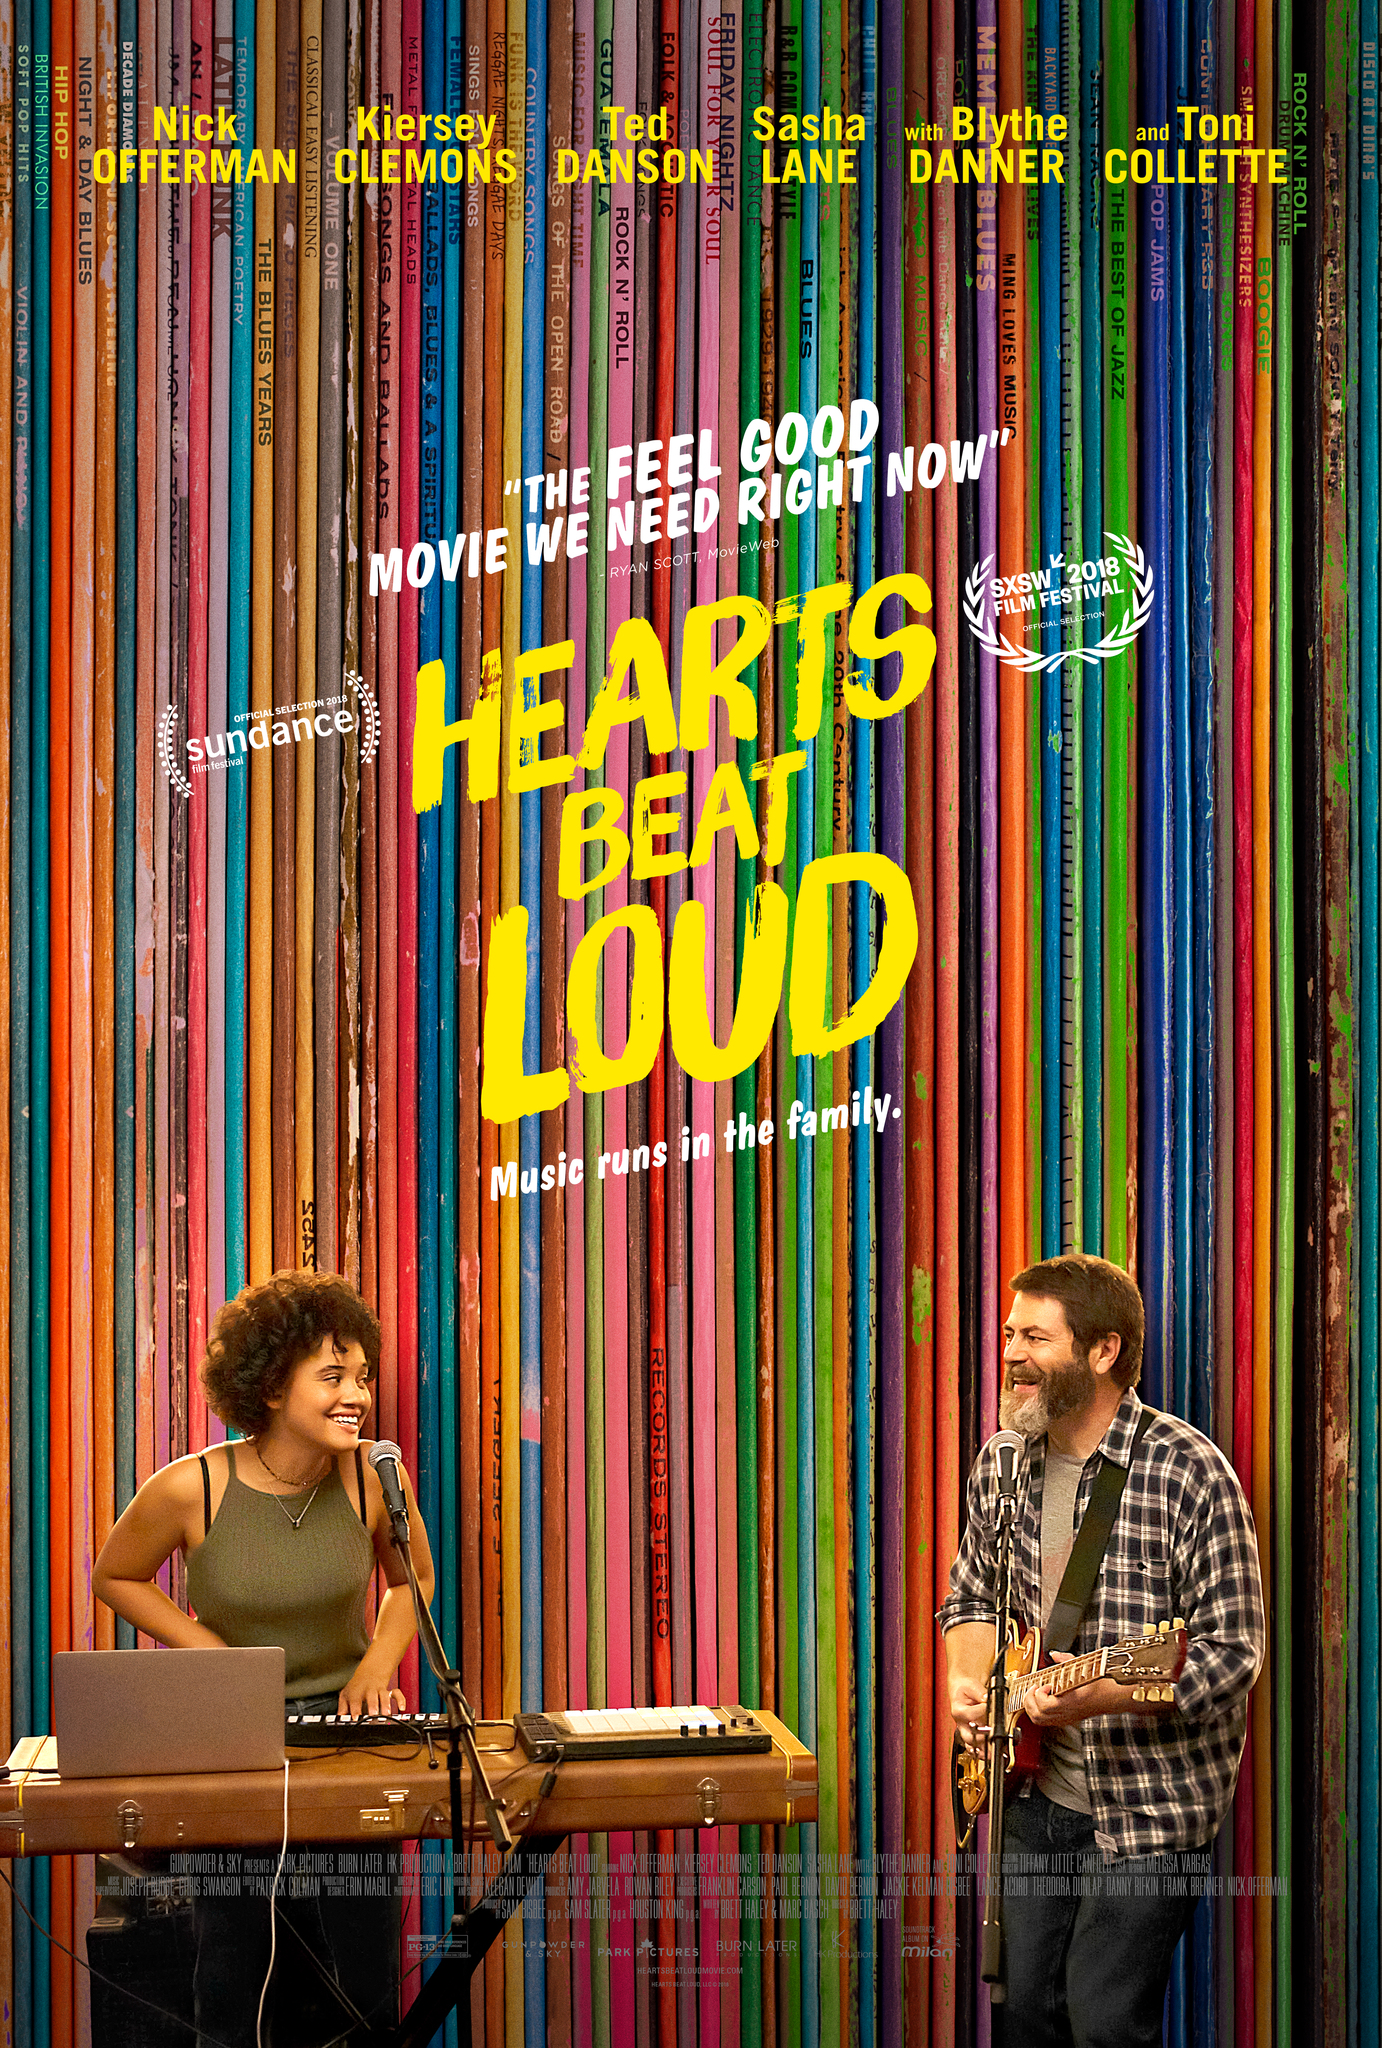 movie poster featuring a young black woman playing keyboard and an older bearded white man playing guitar in front of a rainbow pattern.